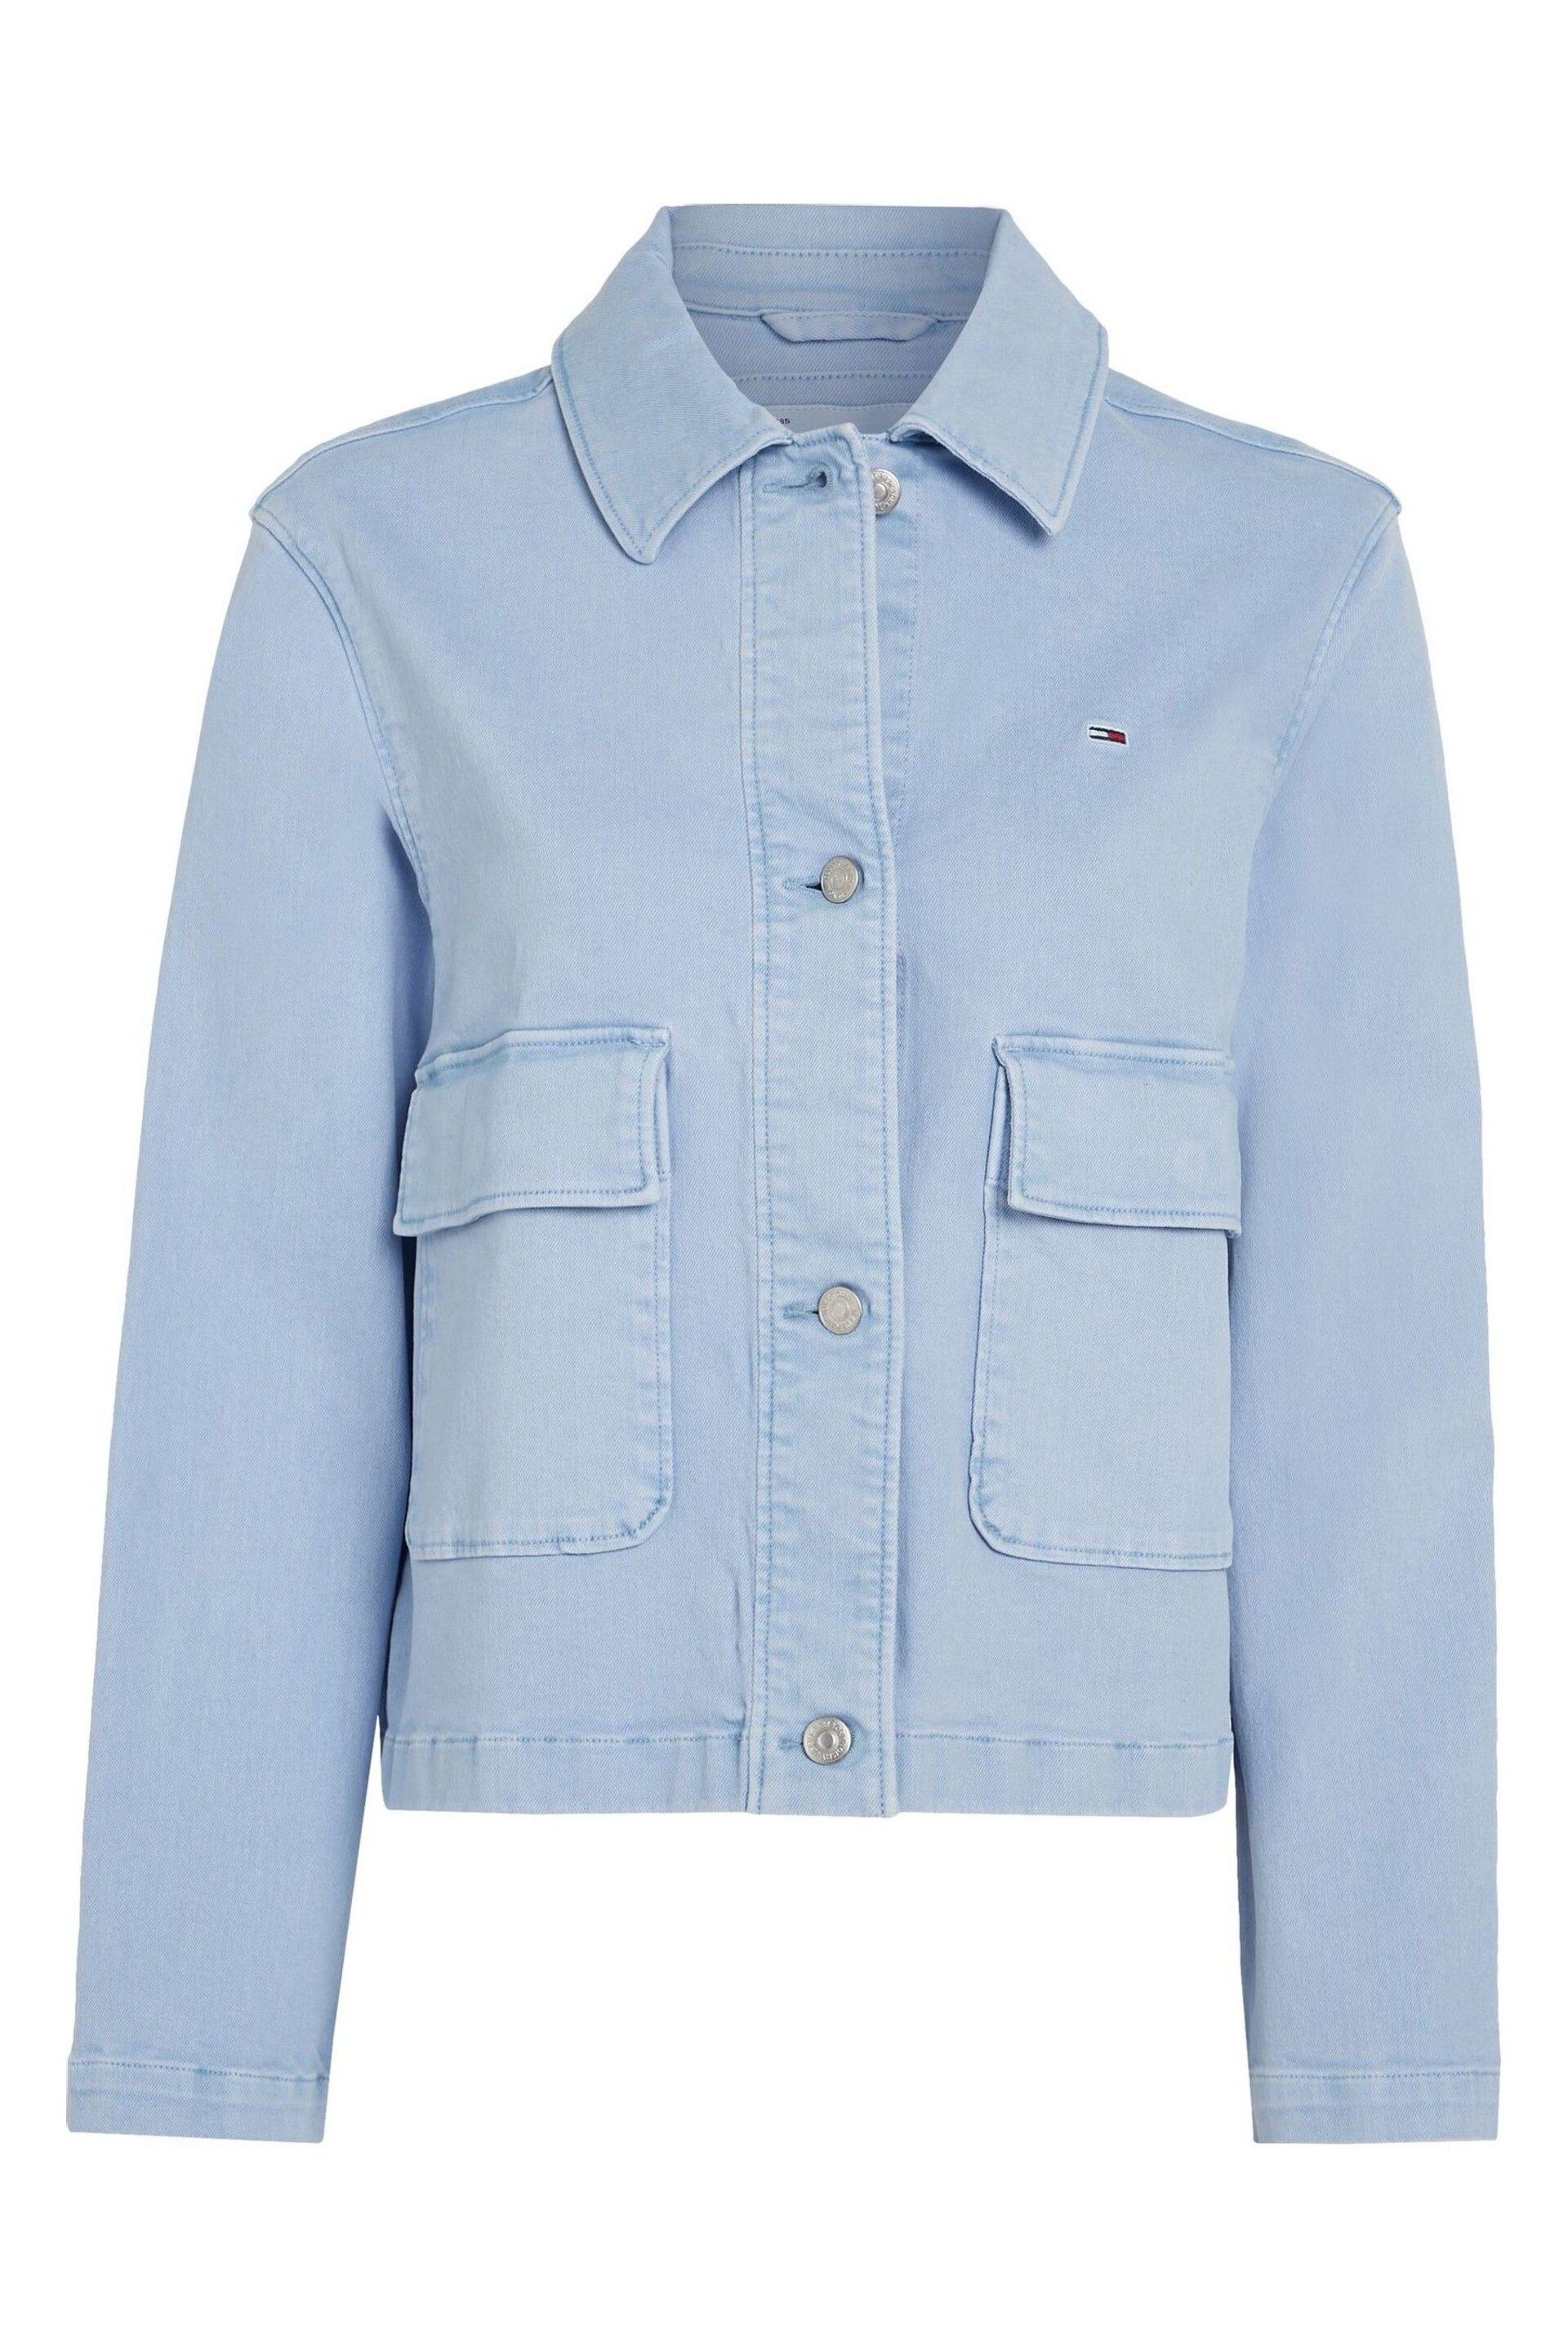 Tommy Jeans Cotton Blue Jacket - Image 4 of 6